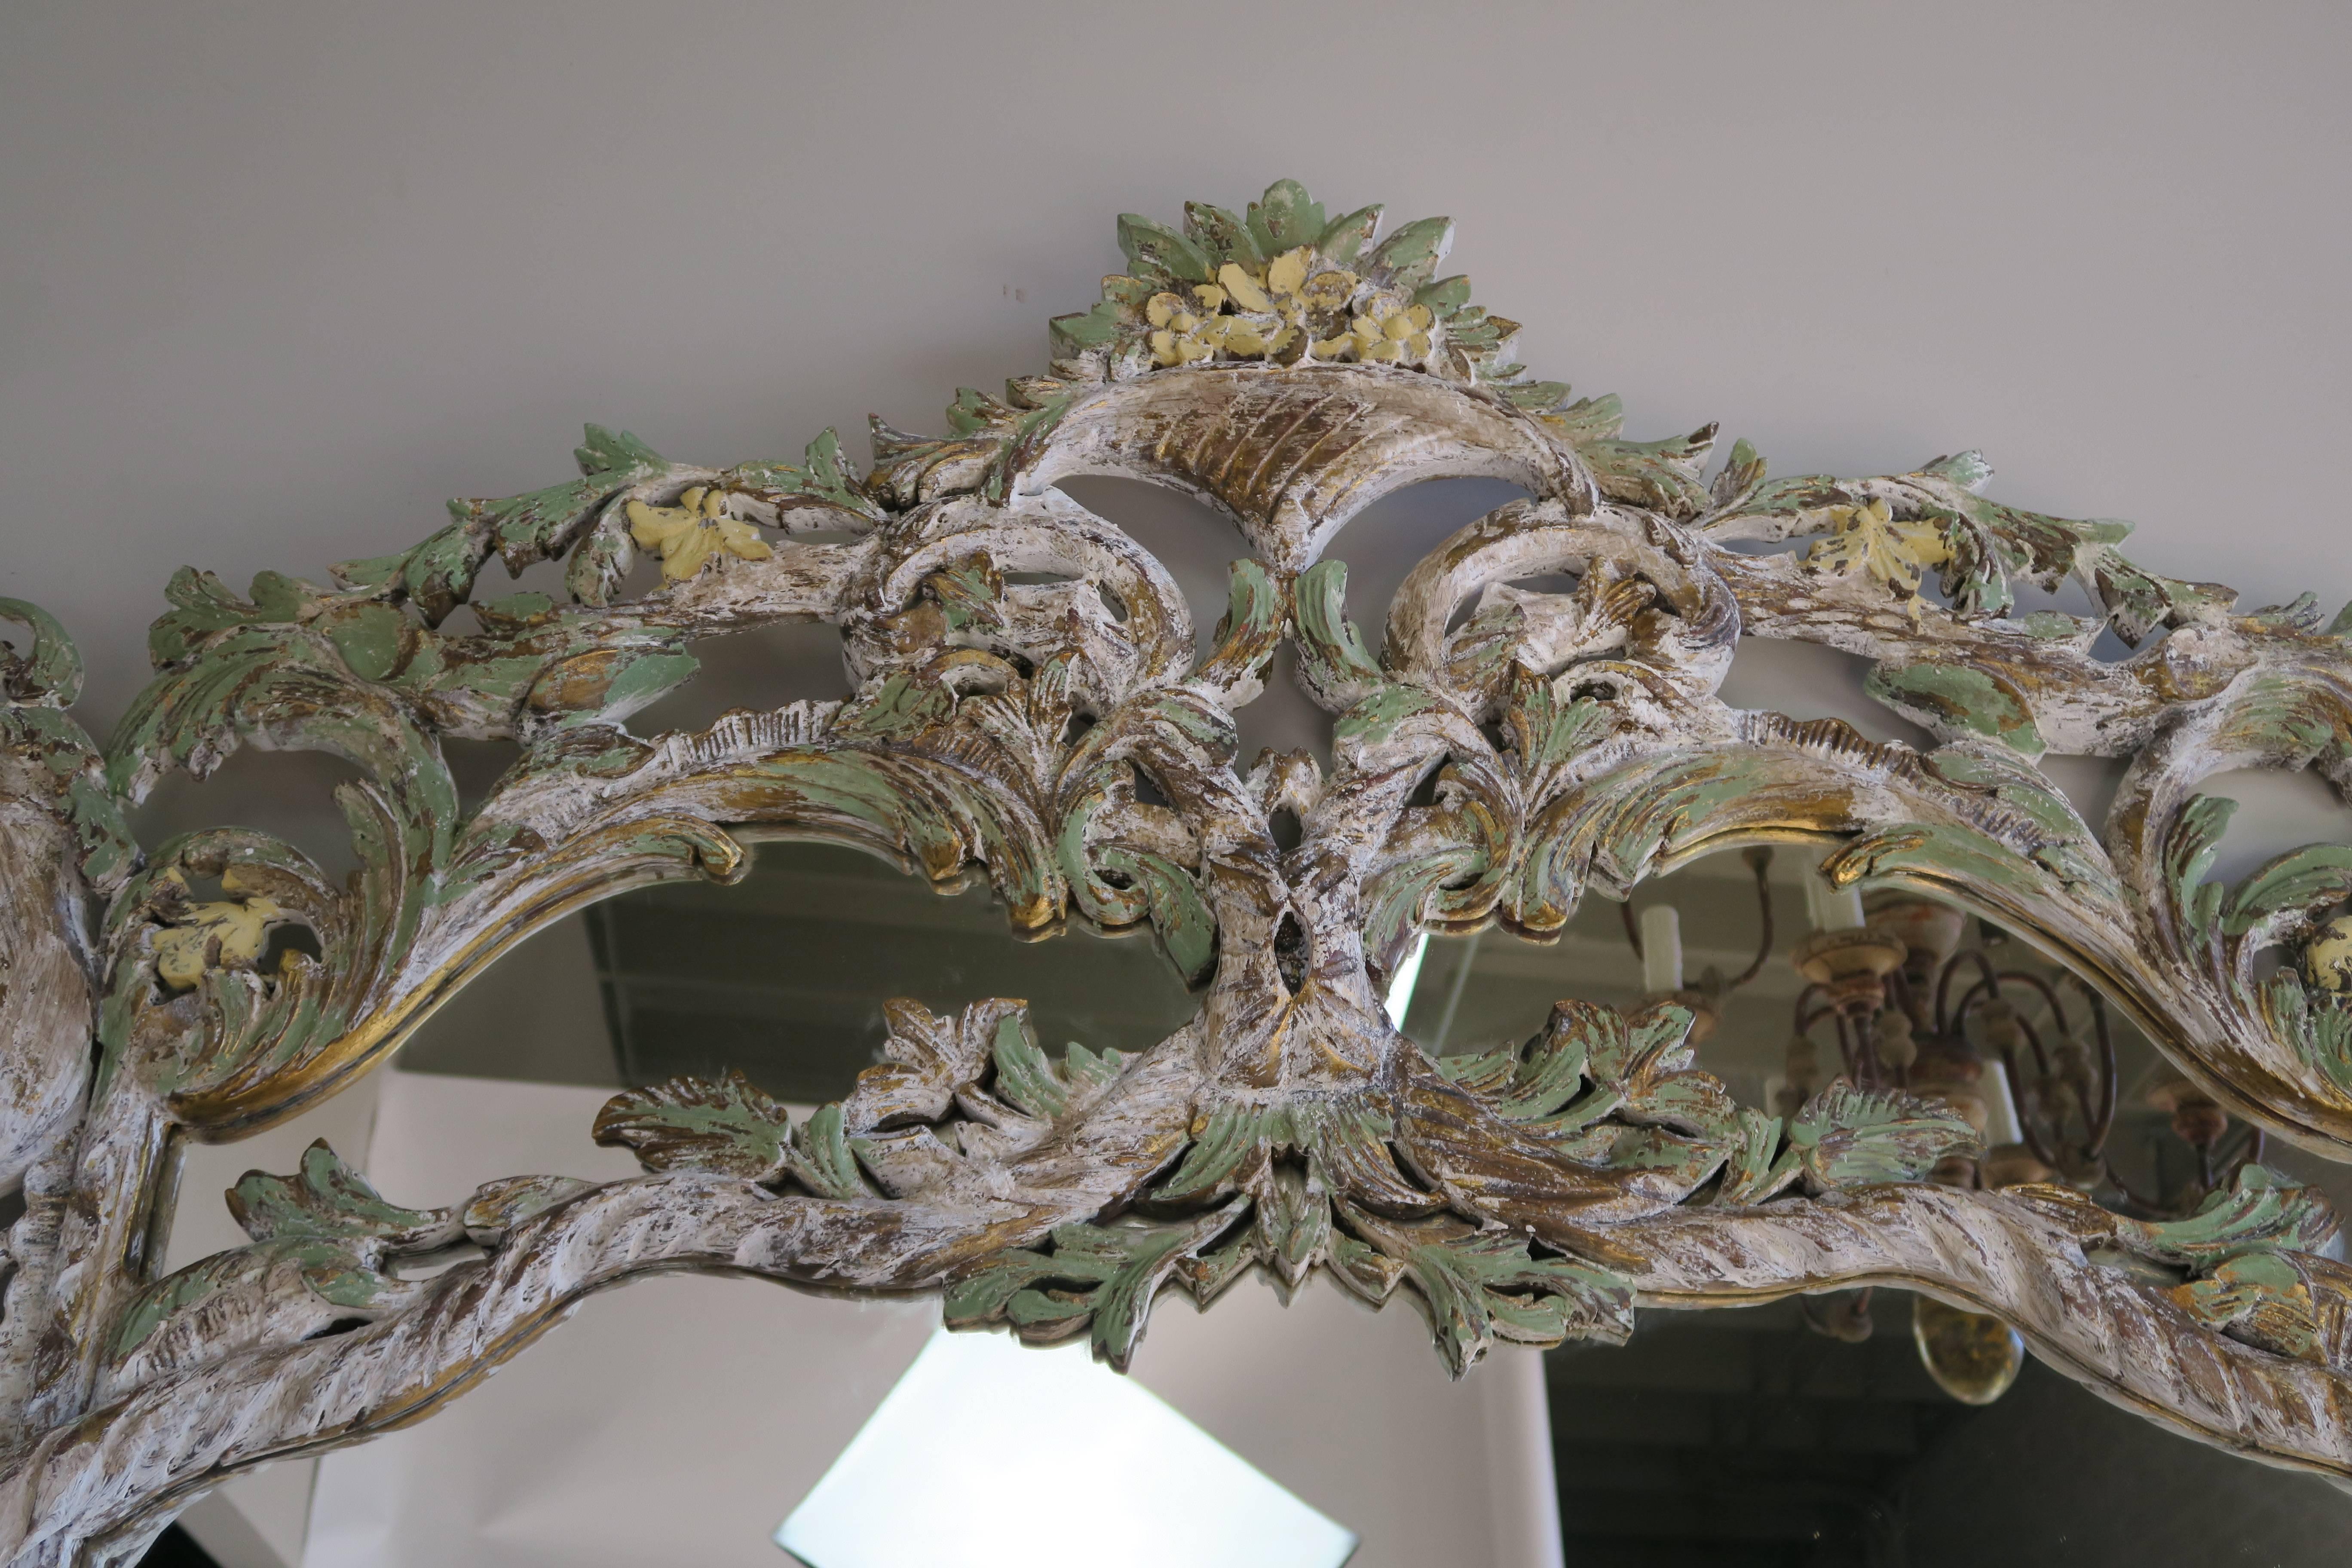 Monumental Italian Rococo style painted mirror with basket of flowers at top and cornucopias in both top corners. Carved garlands of flowers and swirling acanthus leaves throughout the detailed frame. Beautiful shades of antique white, green and